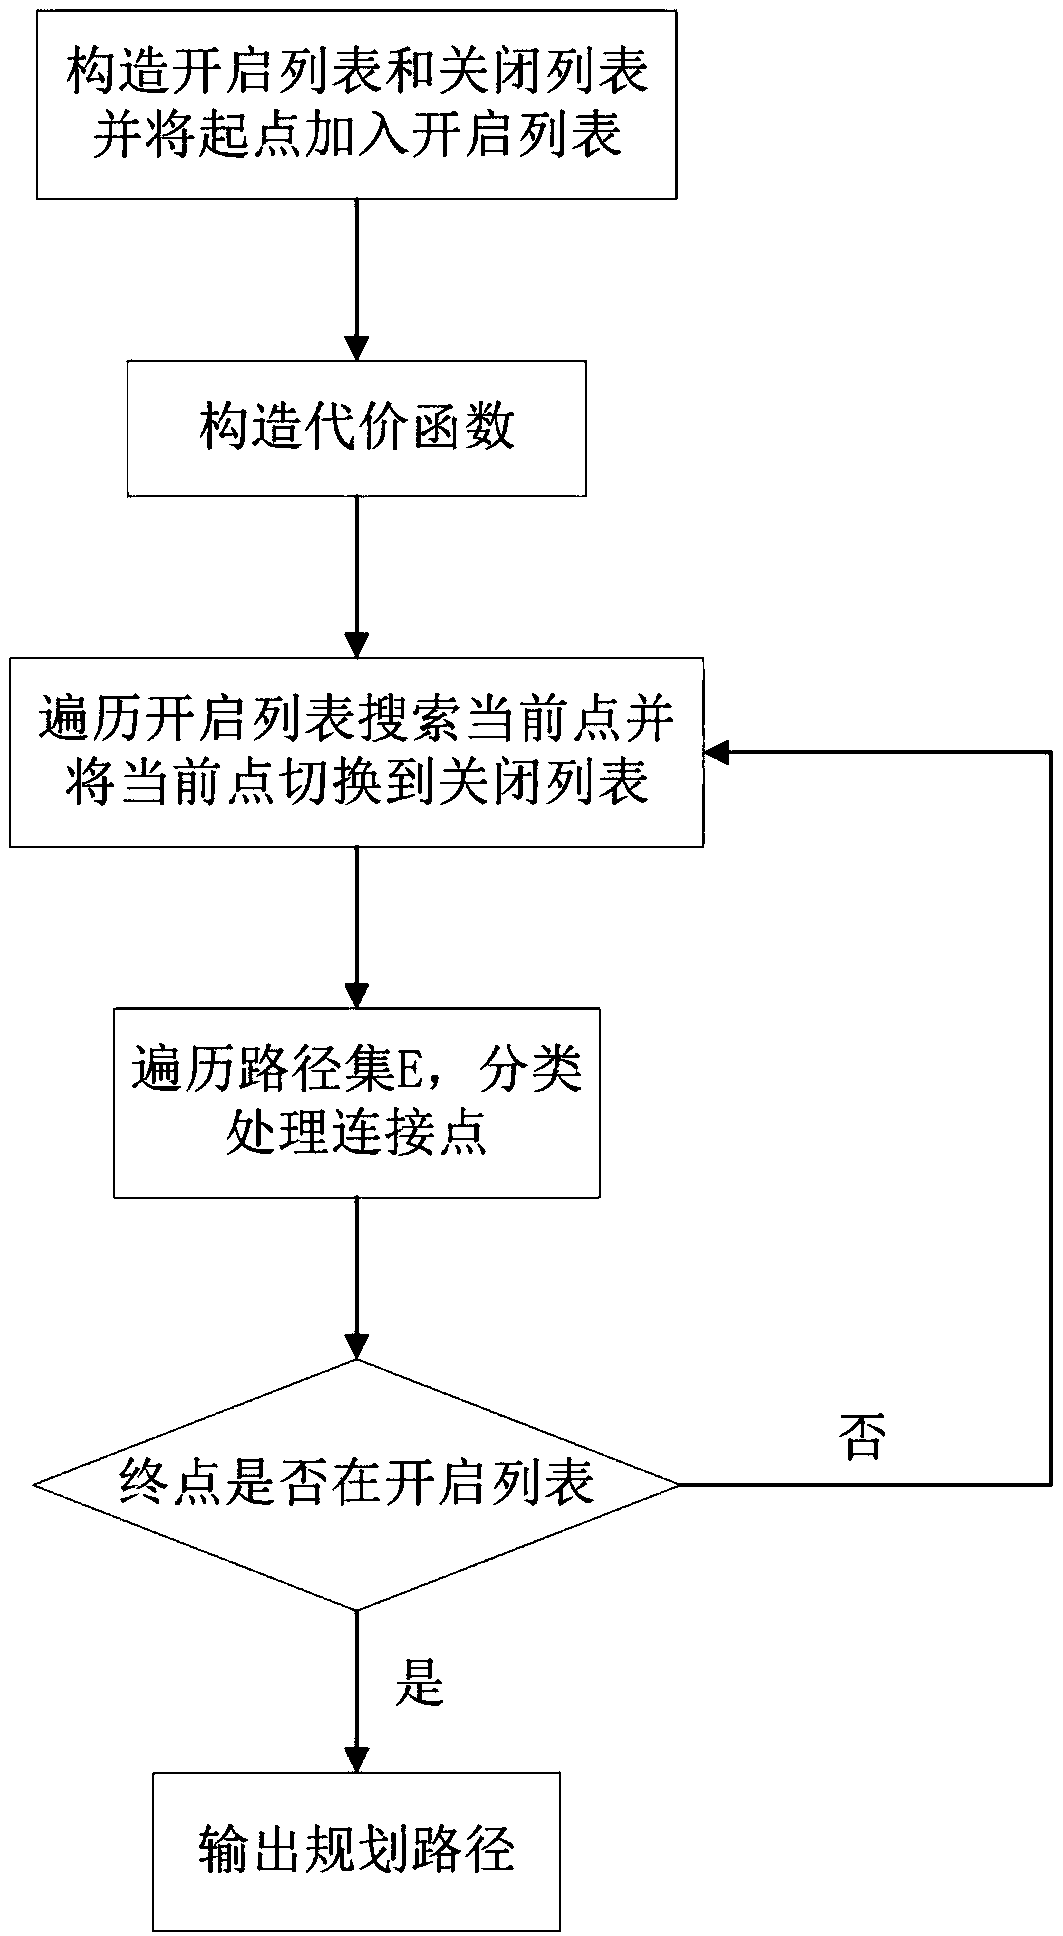 Route planning method under nuclear radiation environment